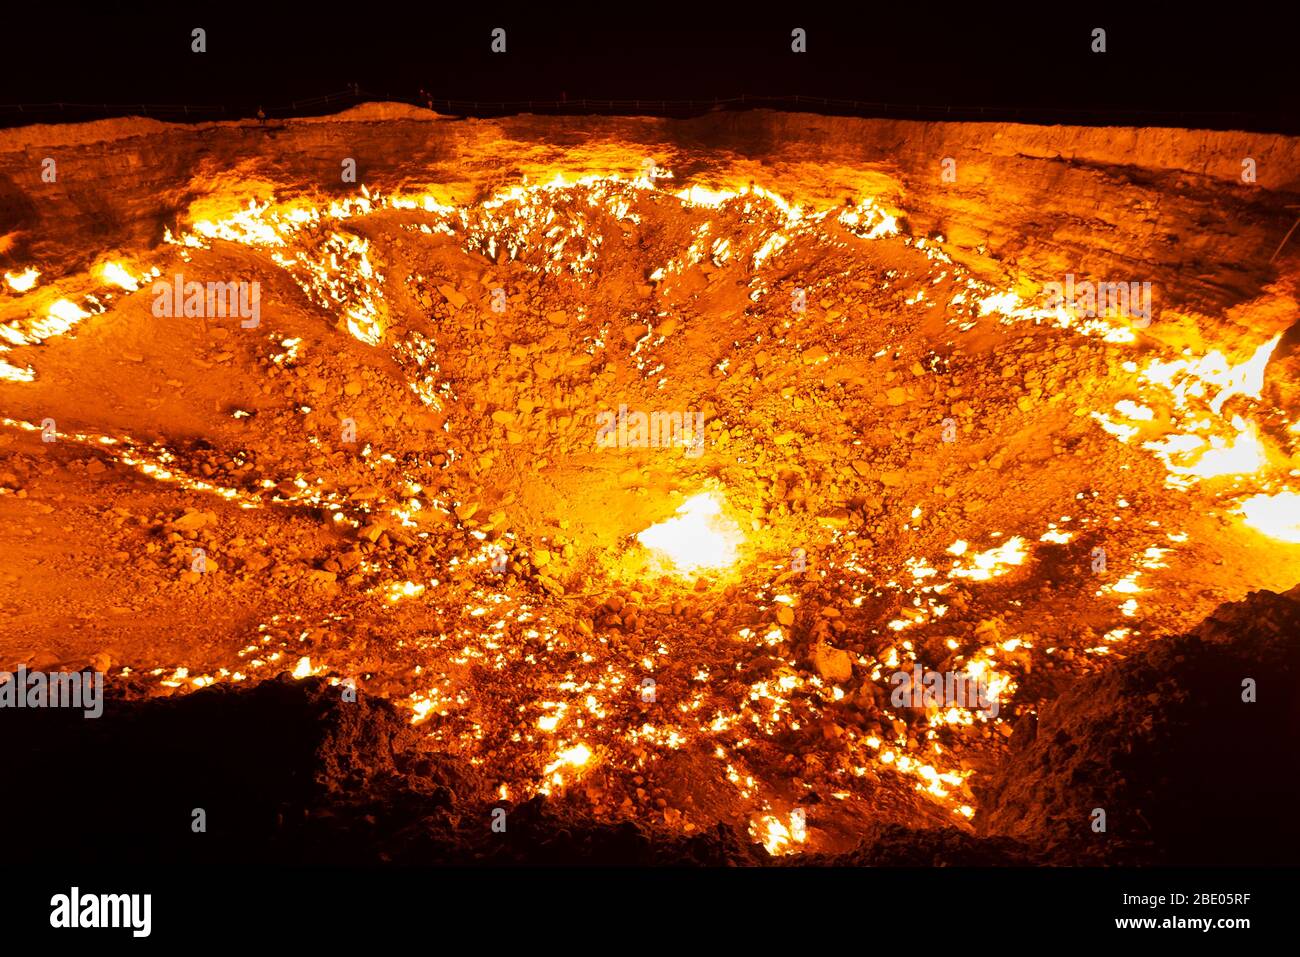 Darvaza Gas Crater in Turkmenistan near Derweze. Flames due to natural gas burning at night. Also know as Darwaza Gates to Hell or Door to Hell. Stock Photo